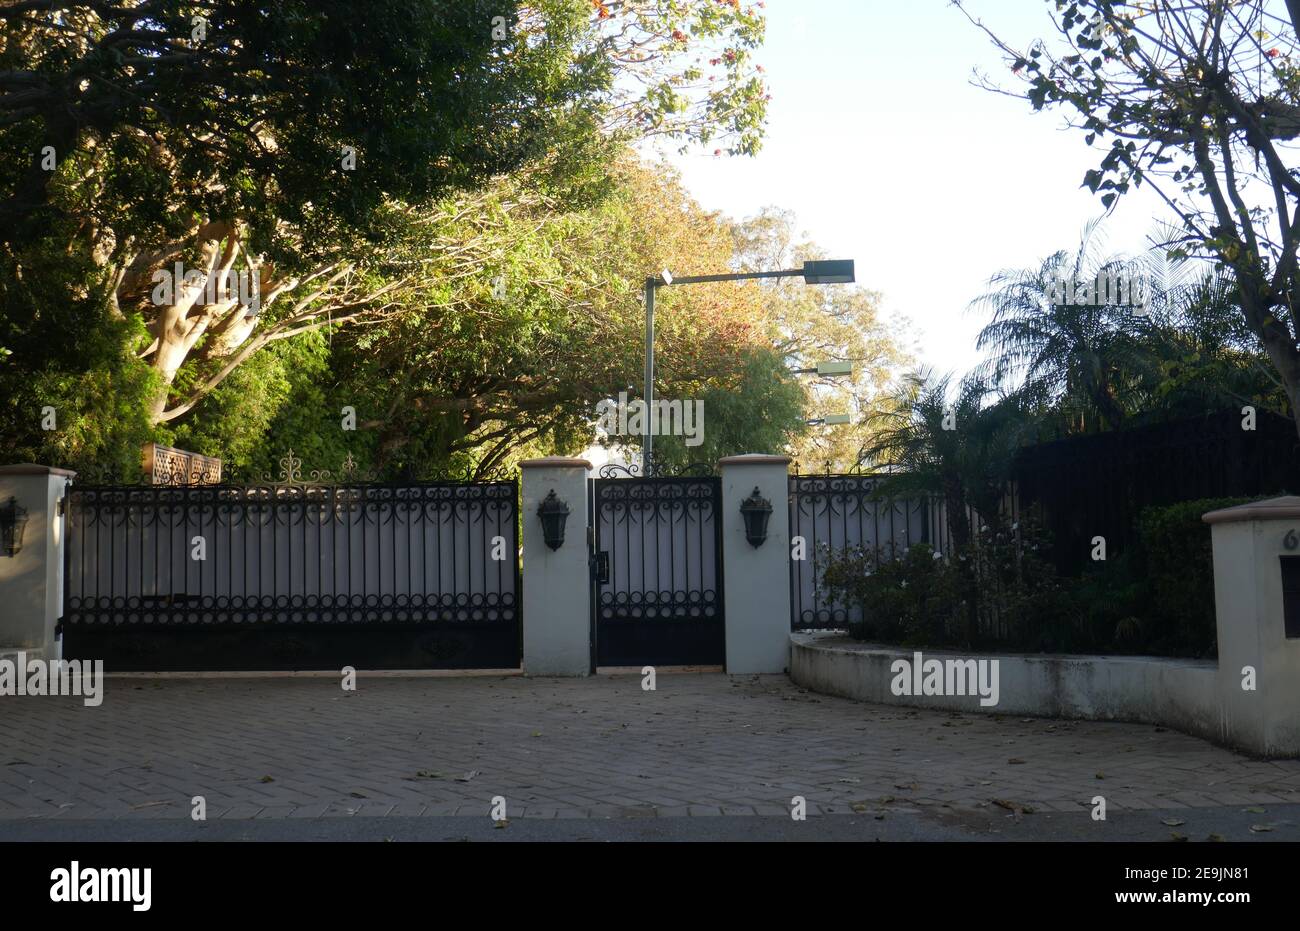 Malibu, California, USA 4th February 2021 A general view of atmosphere of singer Madonna's former home/house on February 4, 2021 in Malibu, California, USA. Photo by Barry King/Alamy Stock Photo Stock Photo